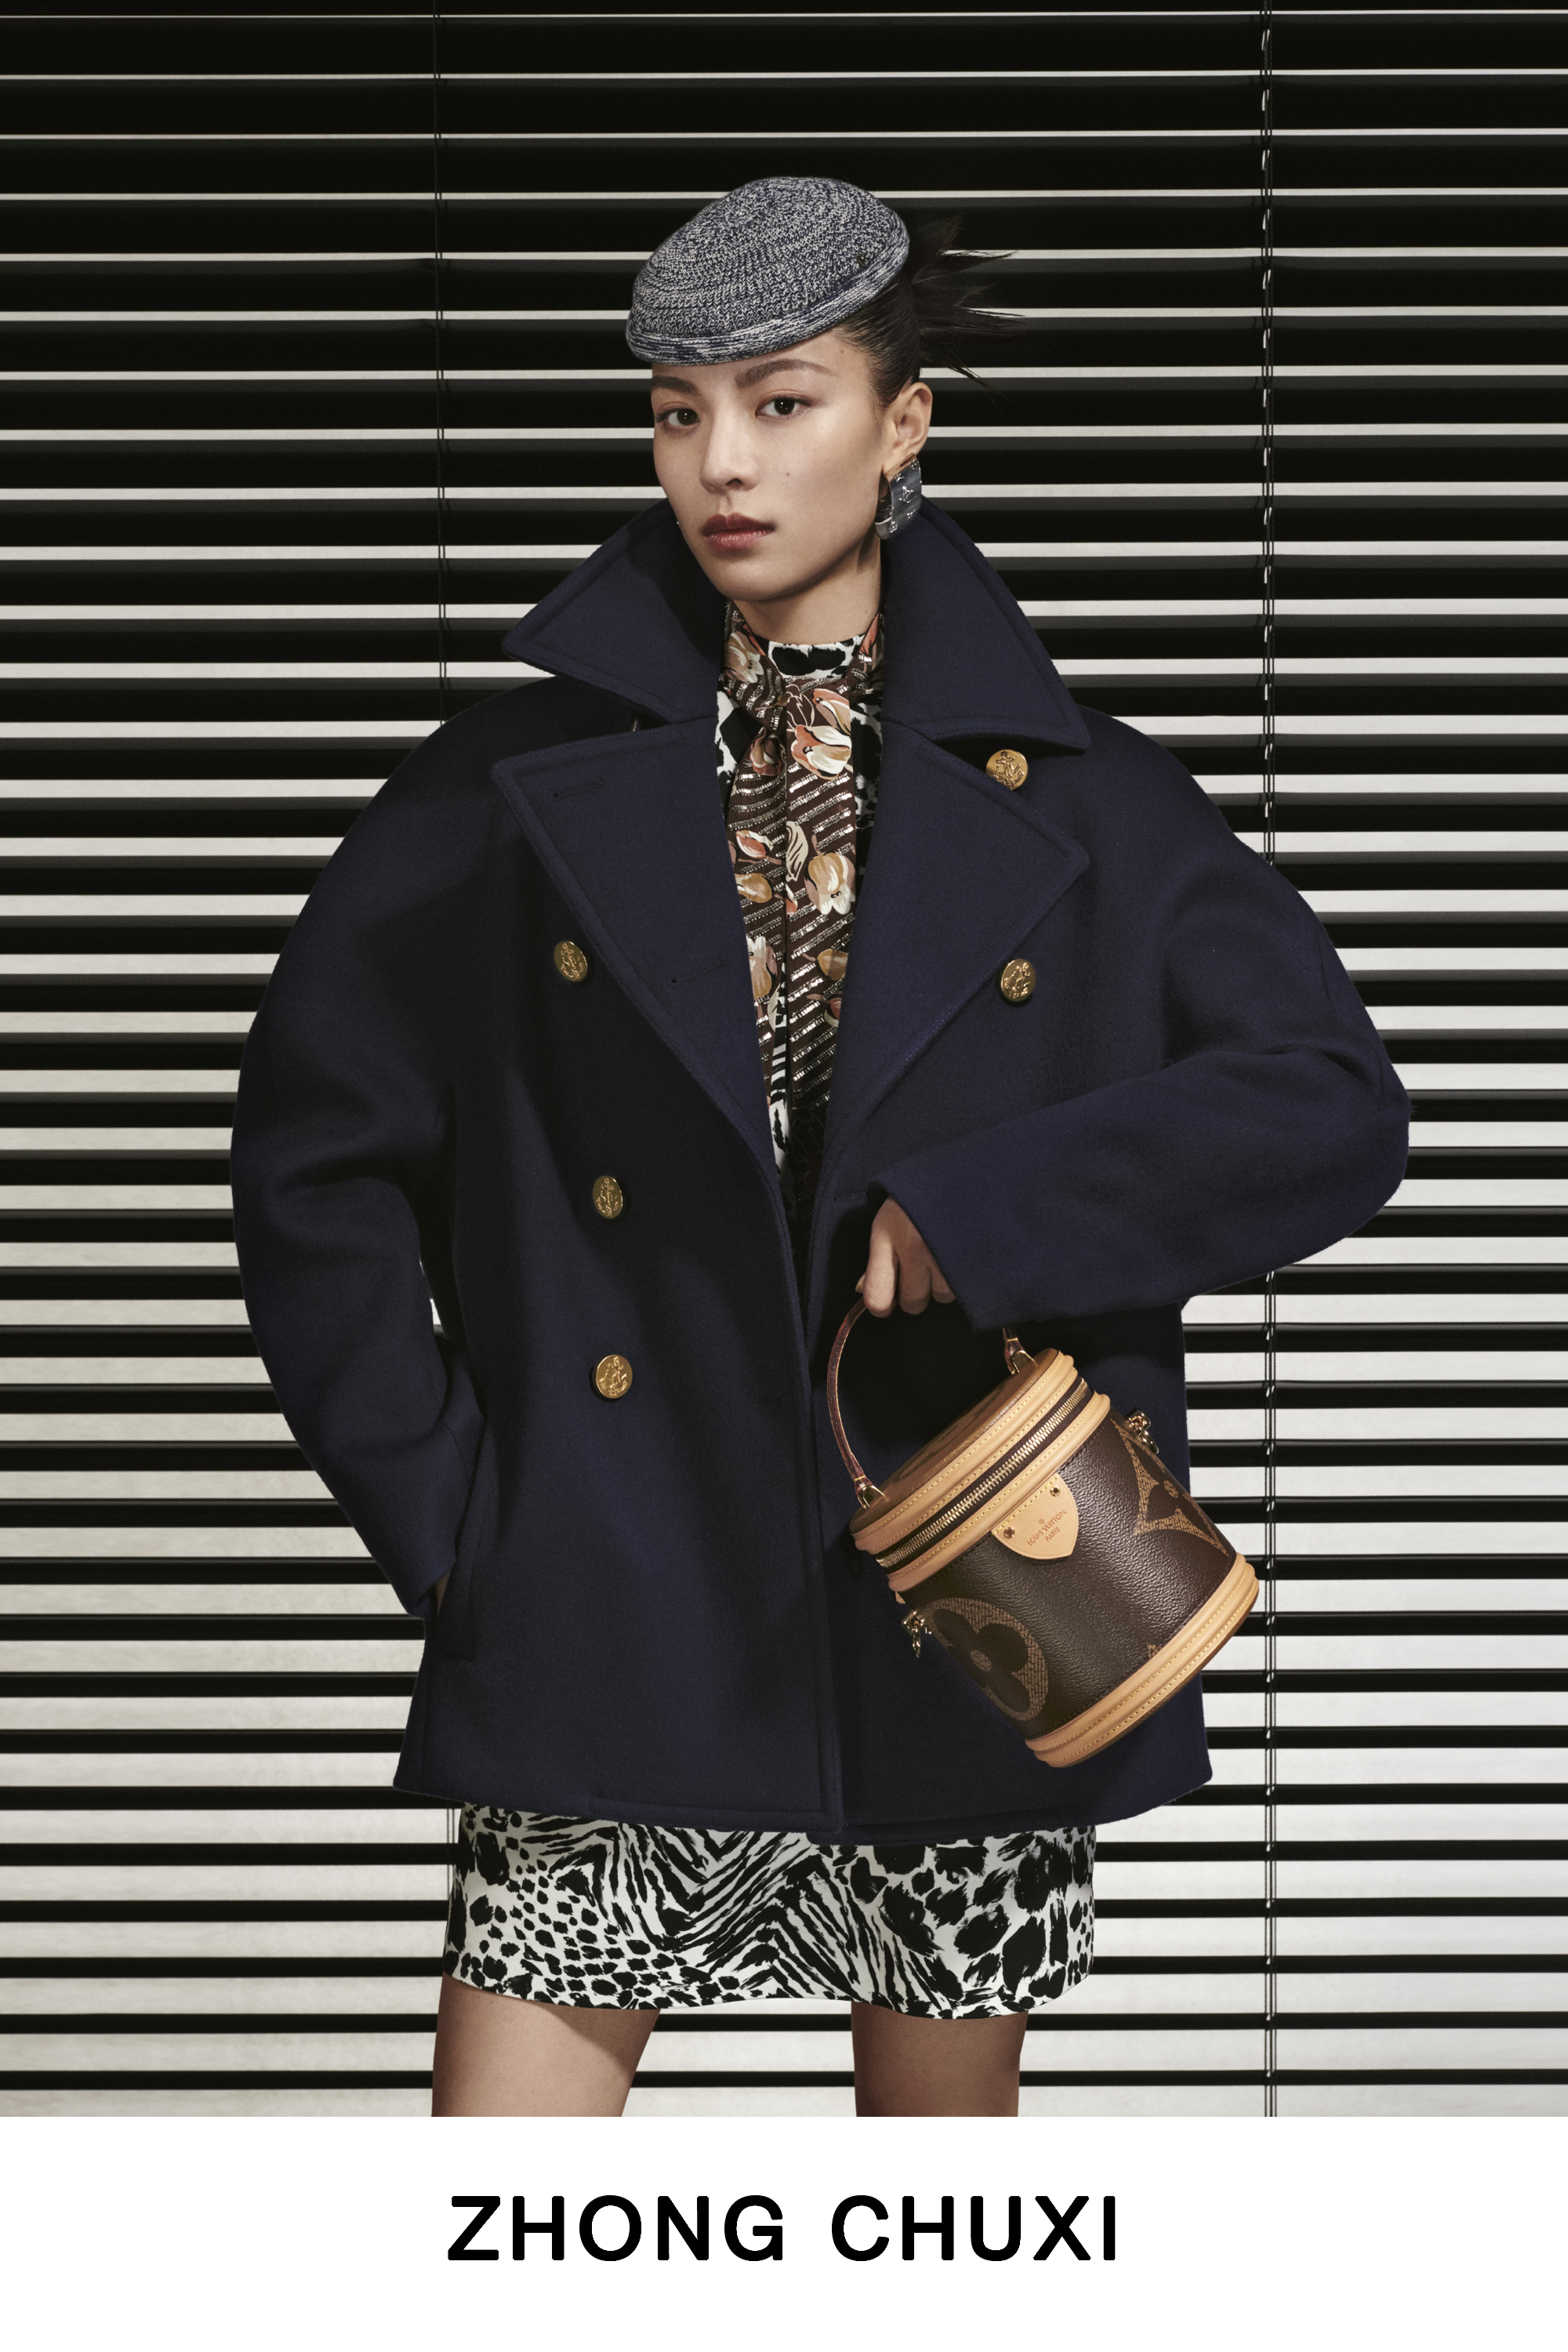 Louis Vuitton on X: #ZhongChuXi and a Tambourin bag in the #LVFW19  Campaign photographed by #CollierSchorrStudio. Explore @TWNGhesquiere's  latest collection for #LouisVuitton via    / X